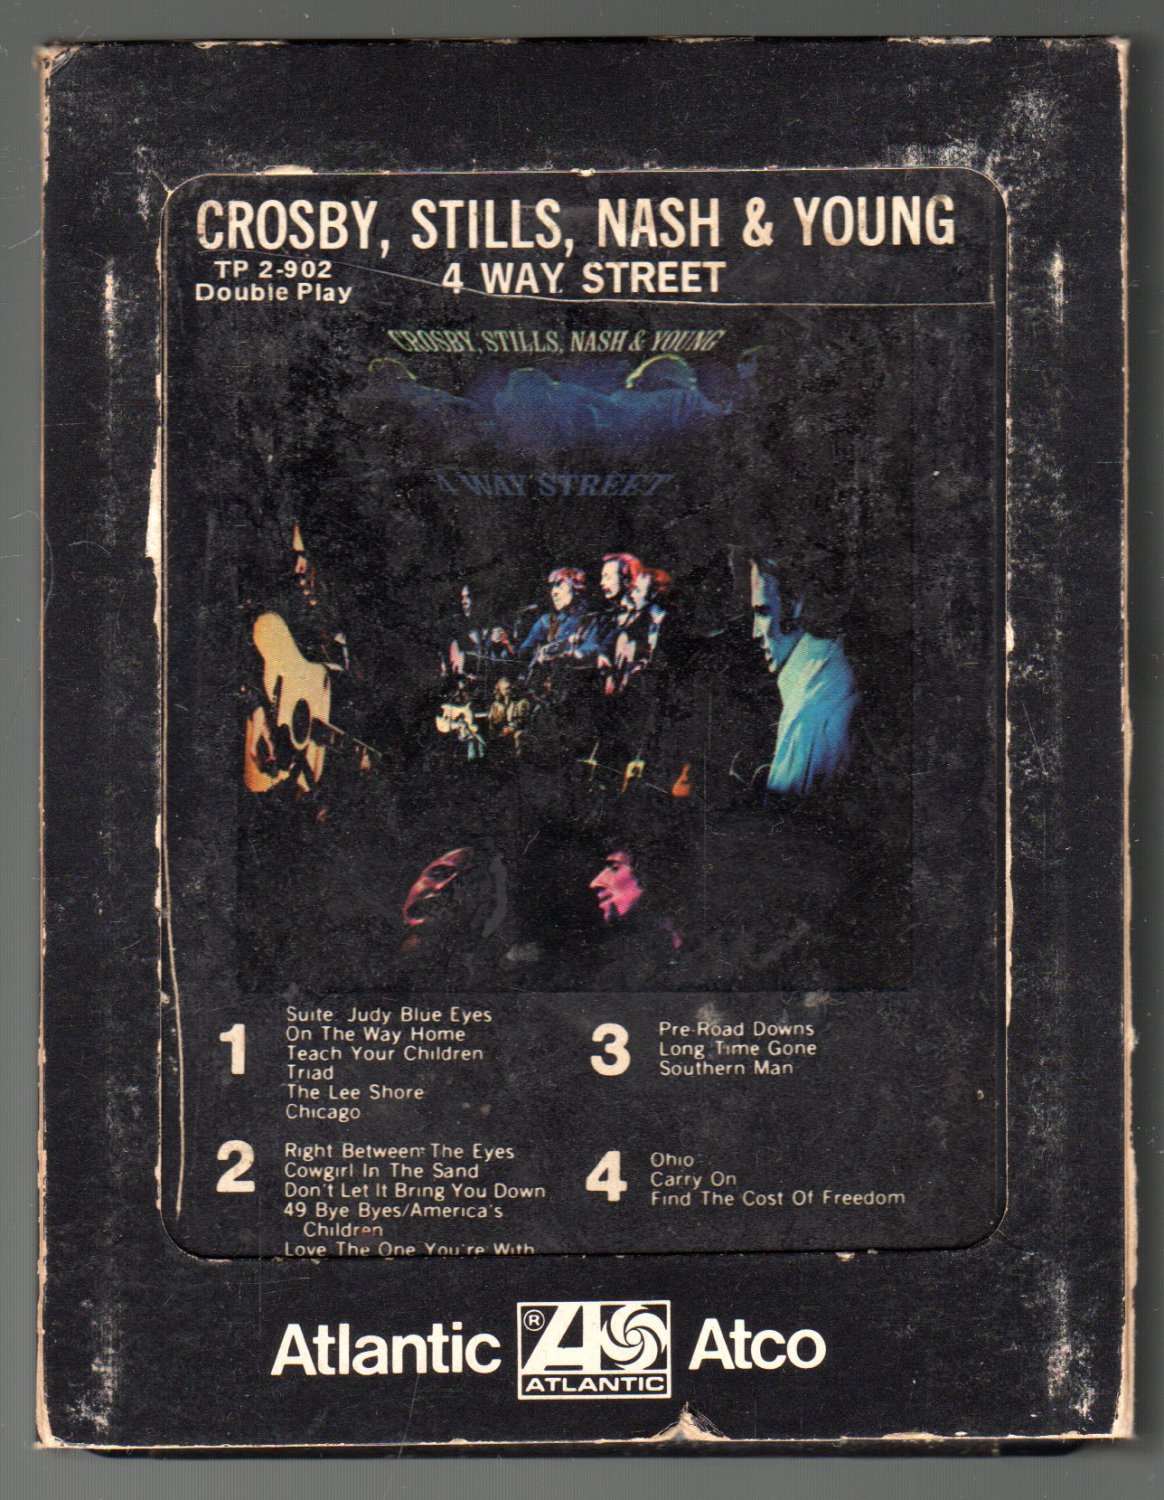 Crosby, Stills & Nash & Young - 4 Way Street 1971 ATLANTIC A41 Double Play 8-track tape